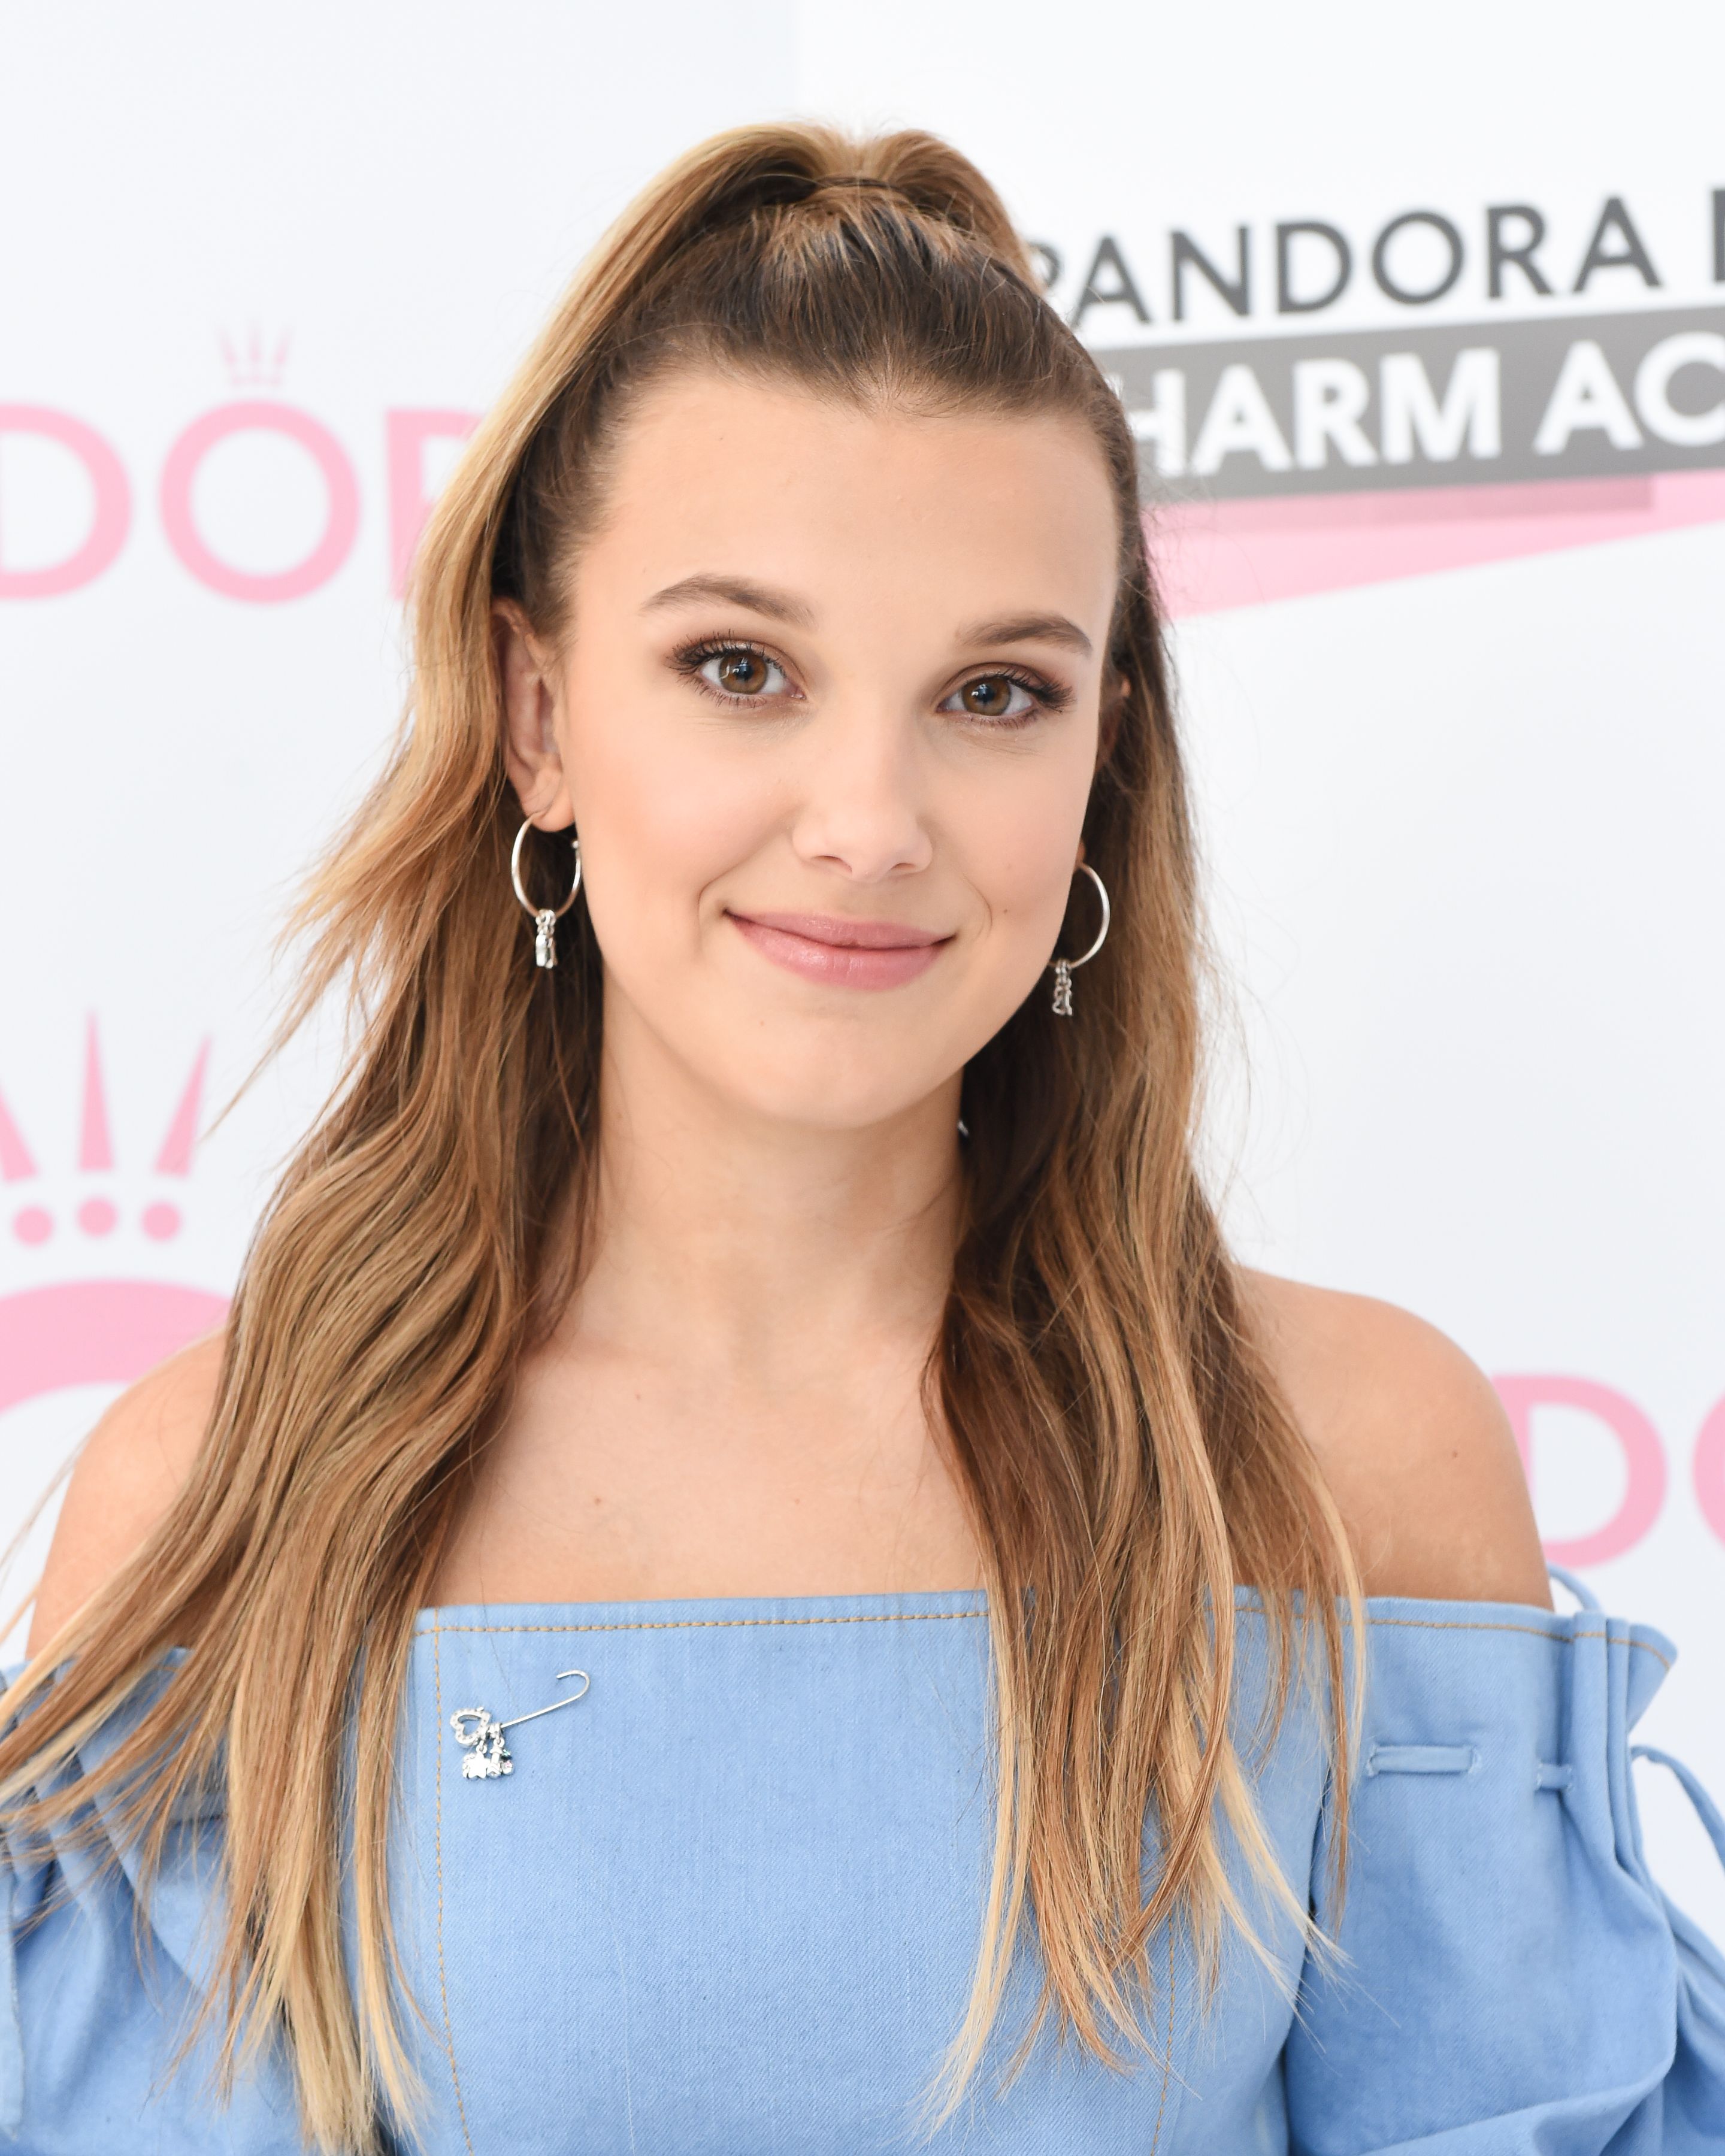 Millie Bobby Brown's $50 Pandora Earrings Are Available on Amazon